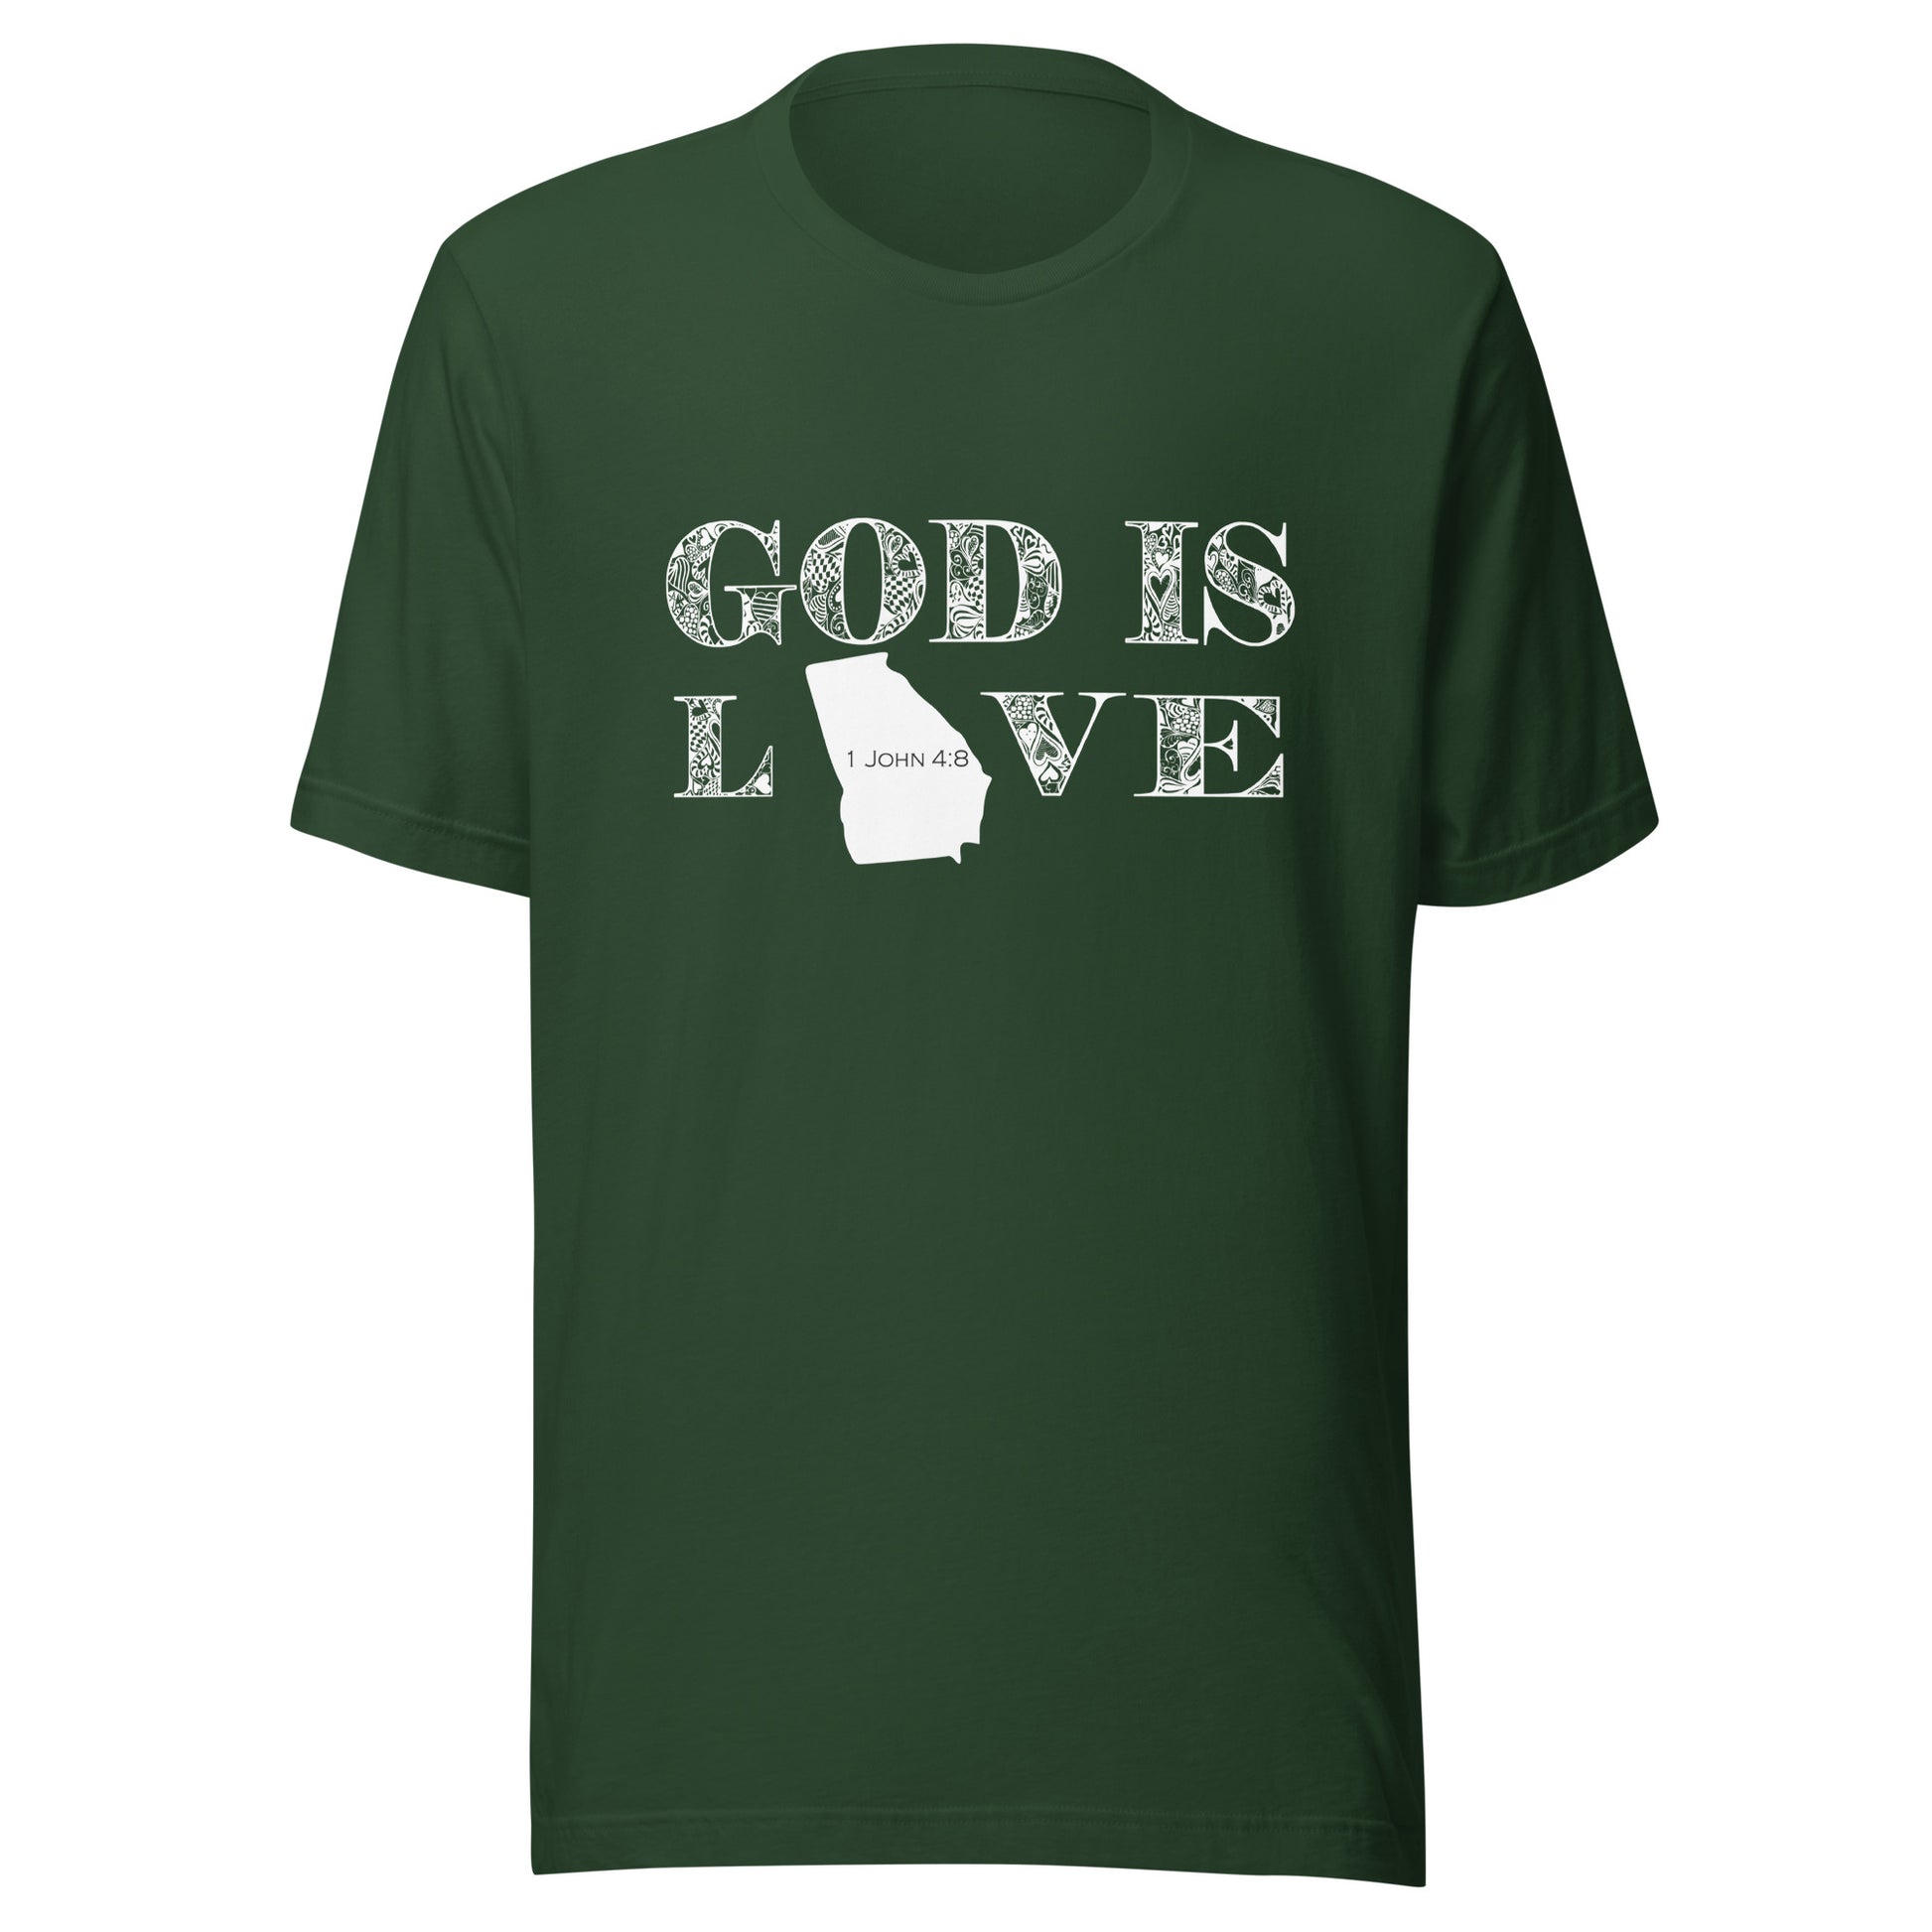 1 John 4:8 God is love Georgia T-shirt in Forest - front view